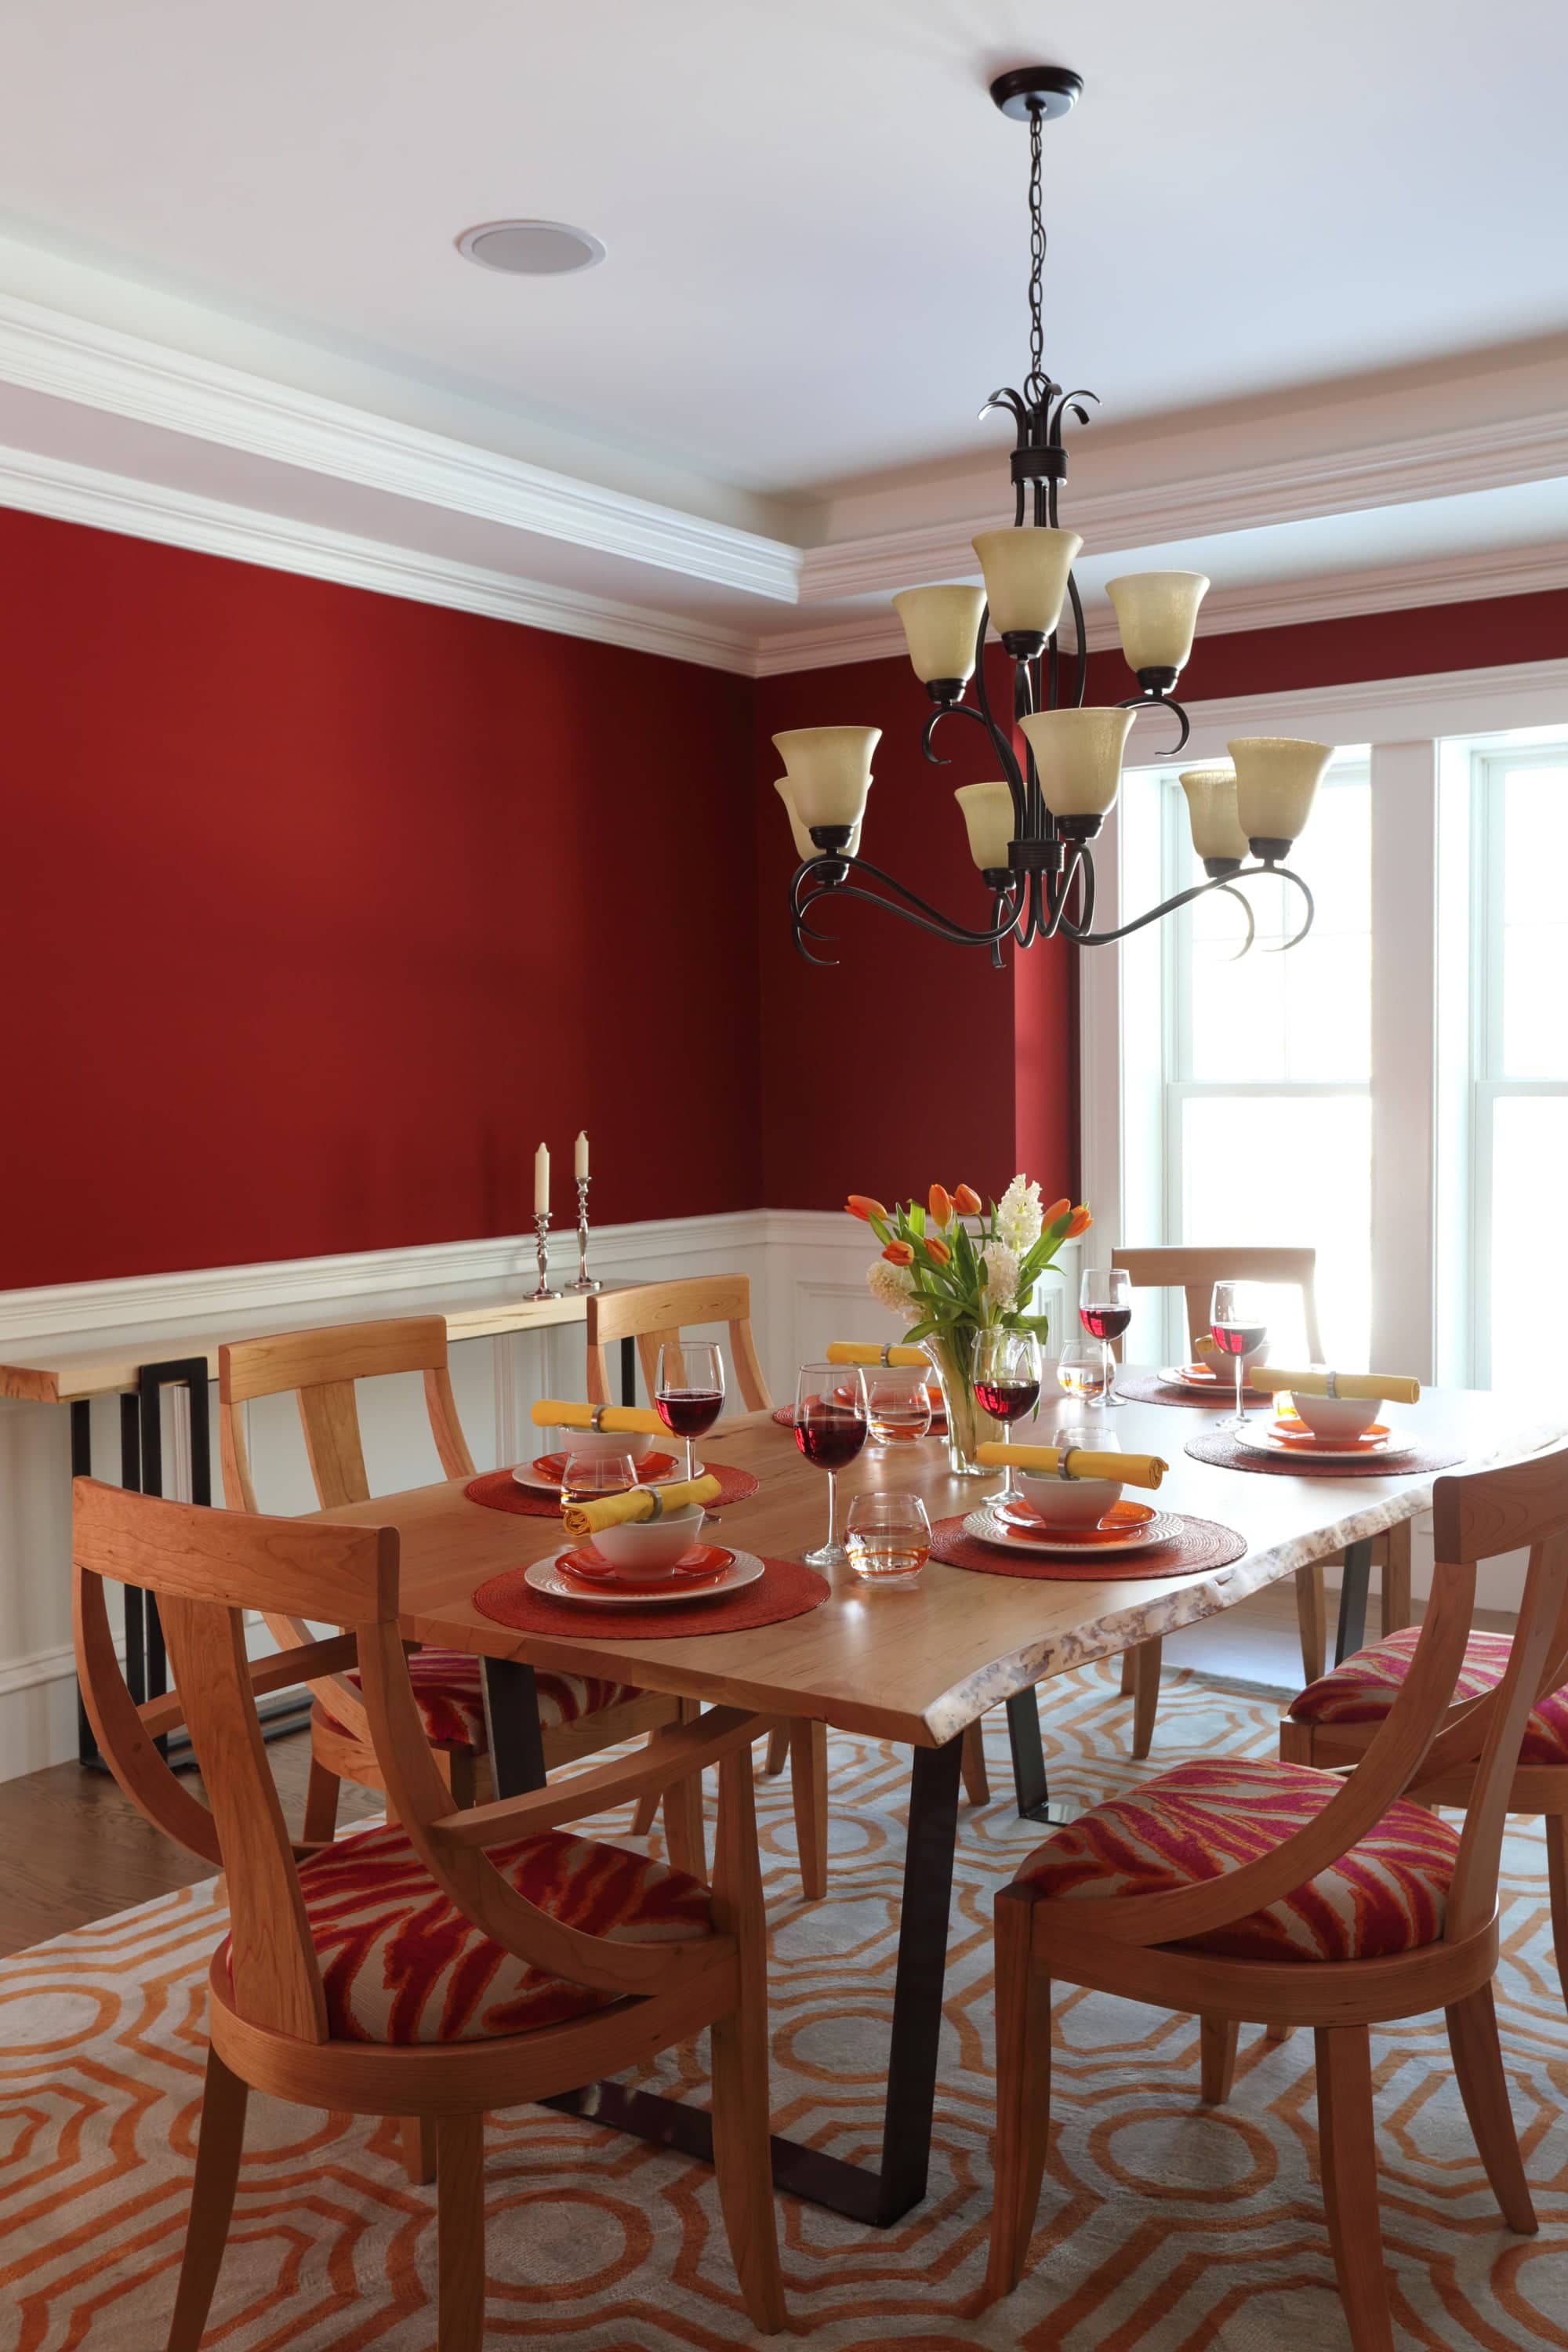 Genveje ammunition Prøve Circle Furniture - Dining Room Paint Colors: From Neutral to Bold